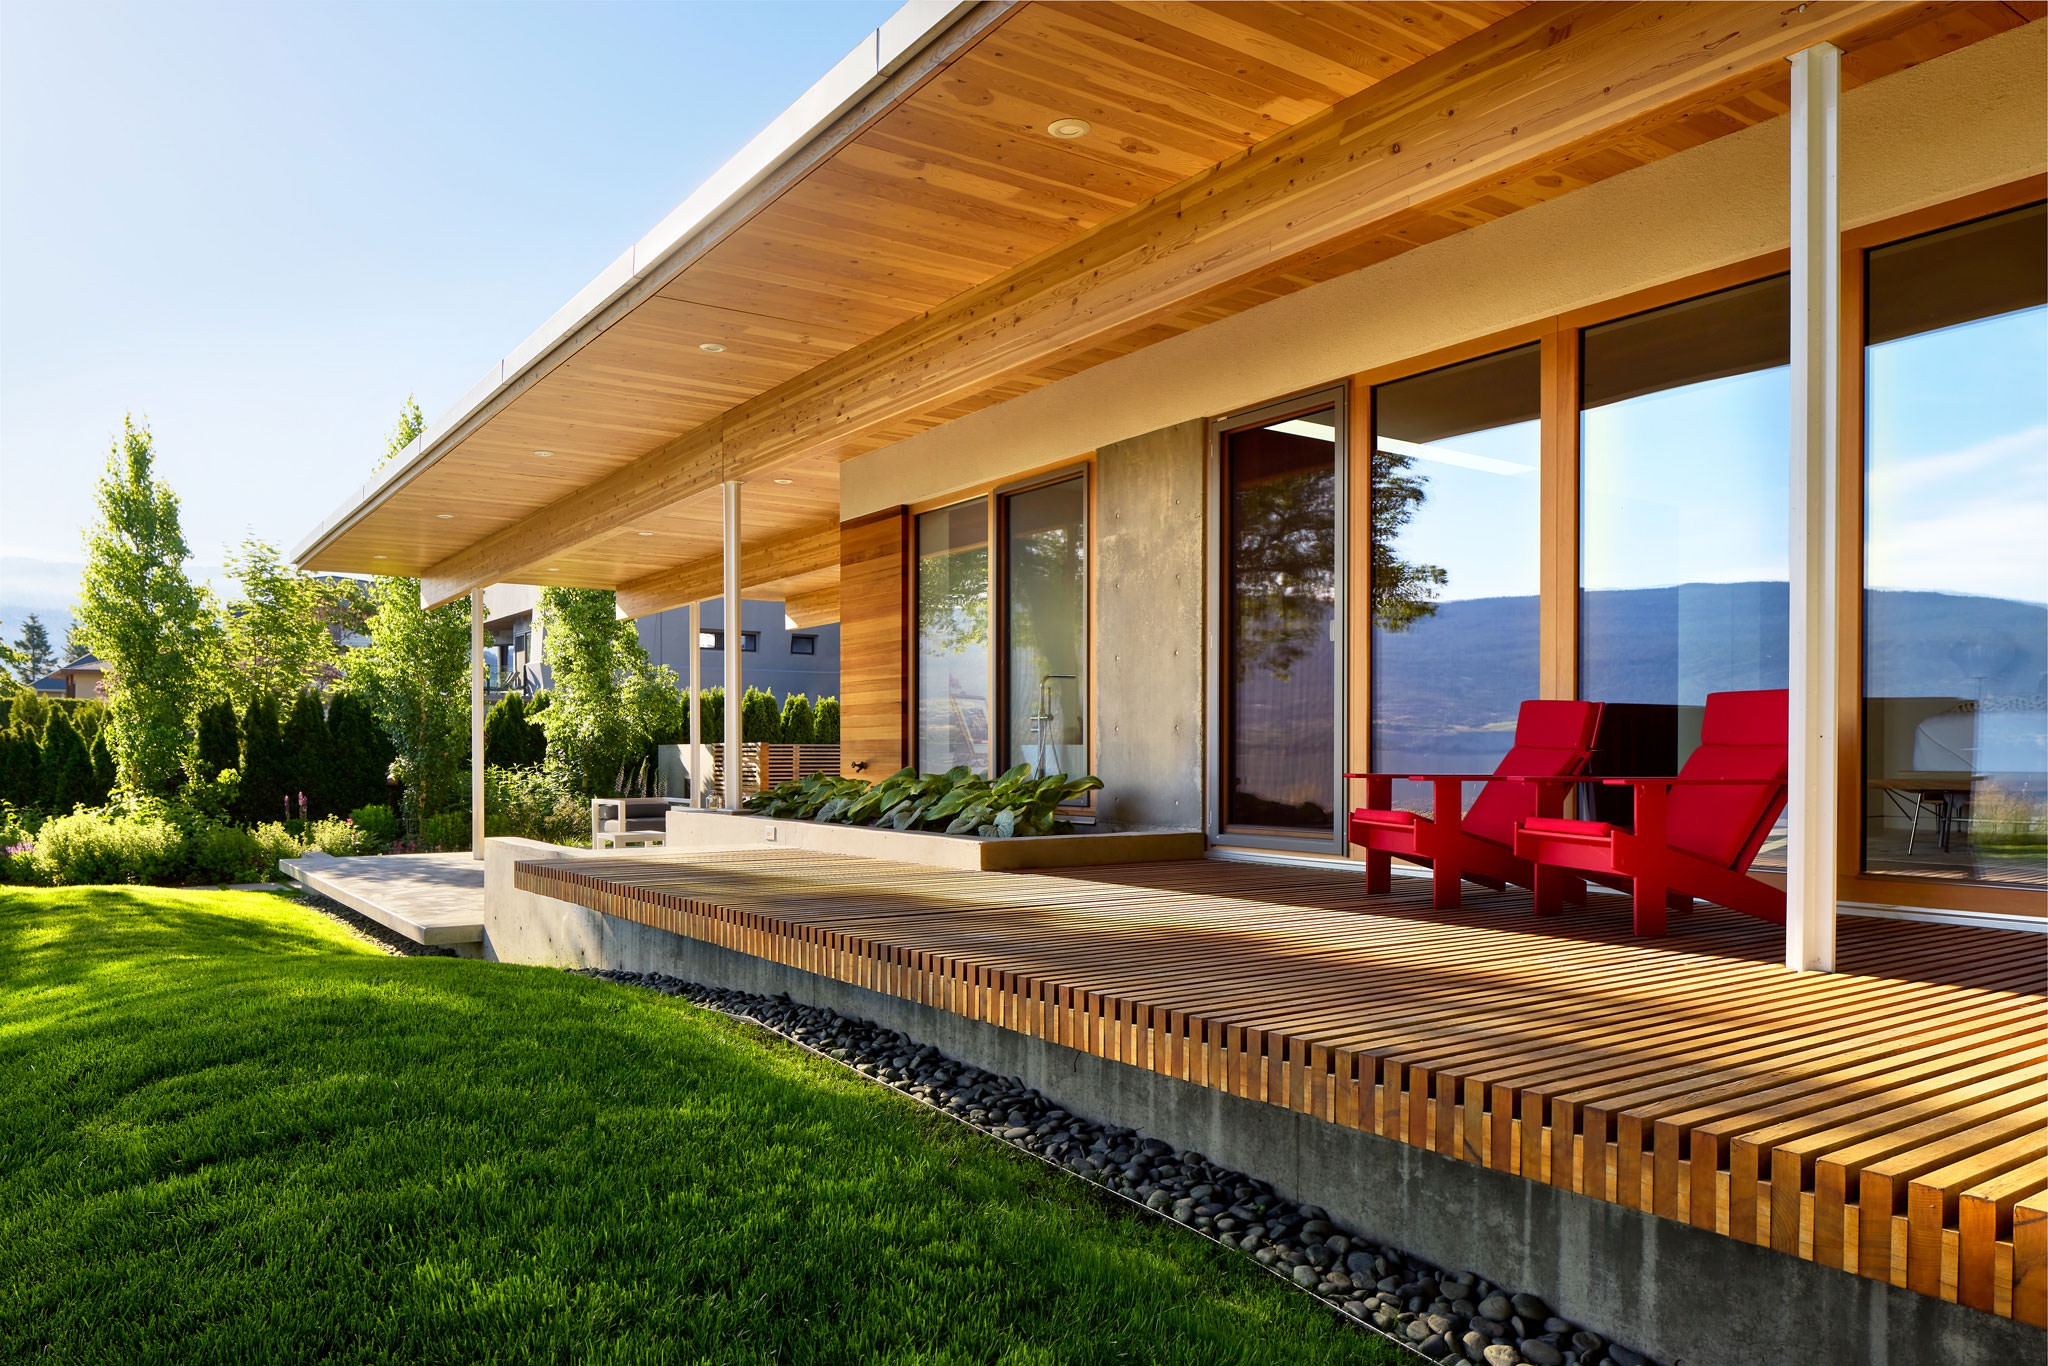 Detail exterior view of modern residence with wood slatted decking and lawn